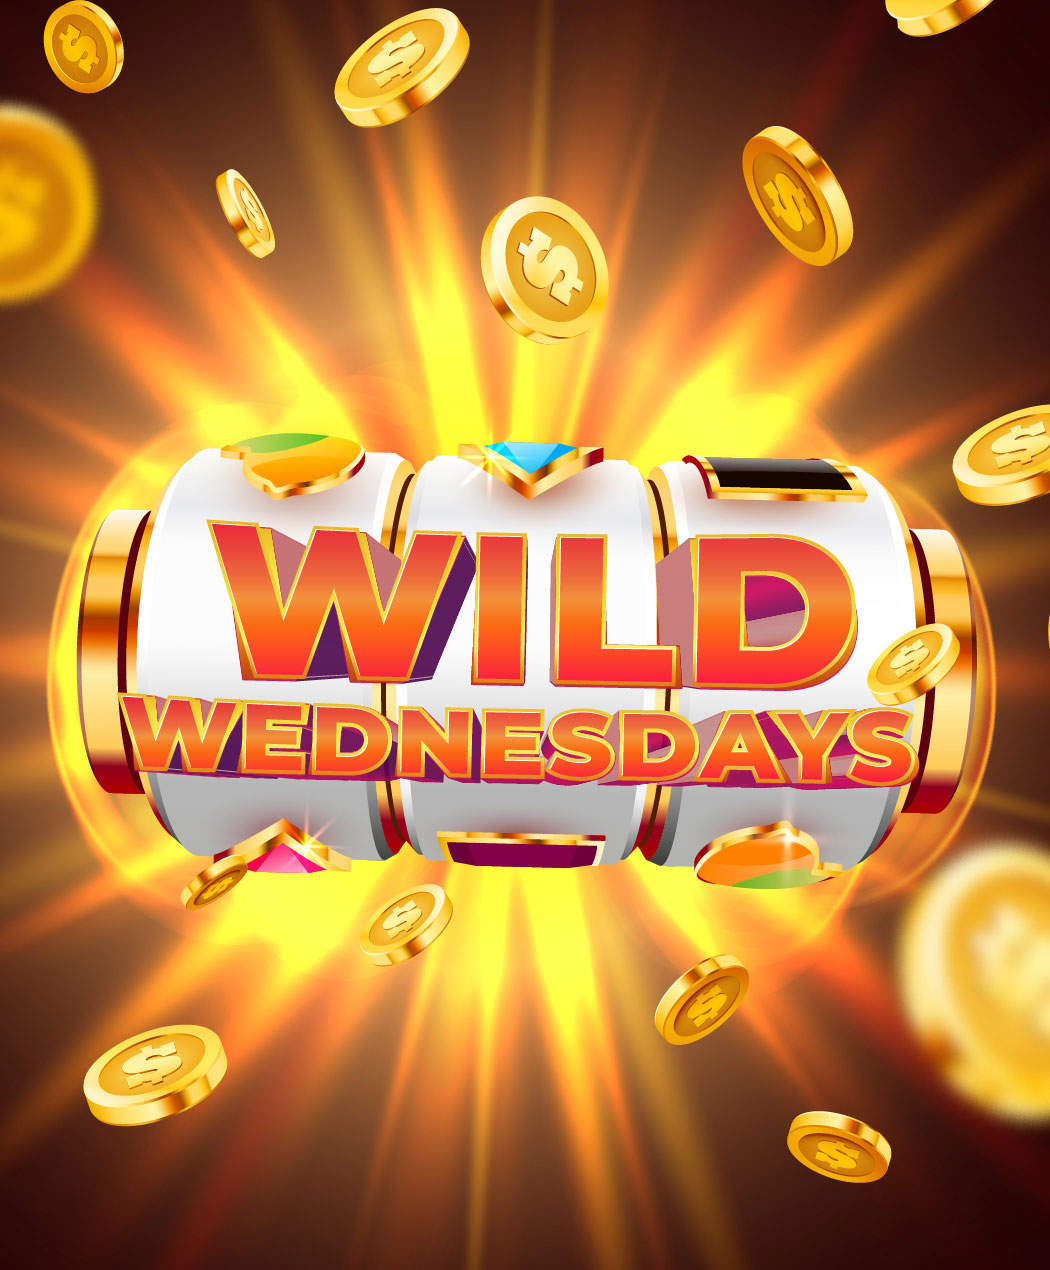 Wild Wednesdays casino promotion at point place casino